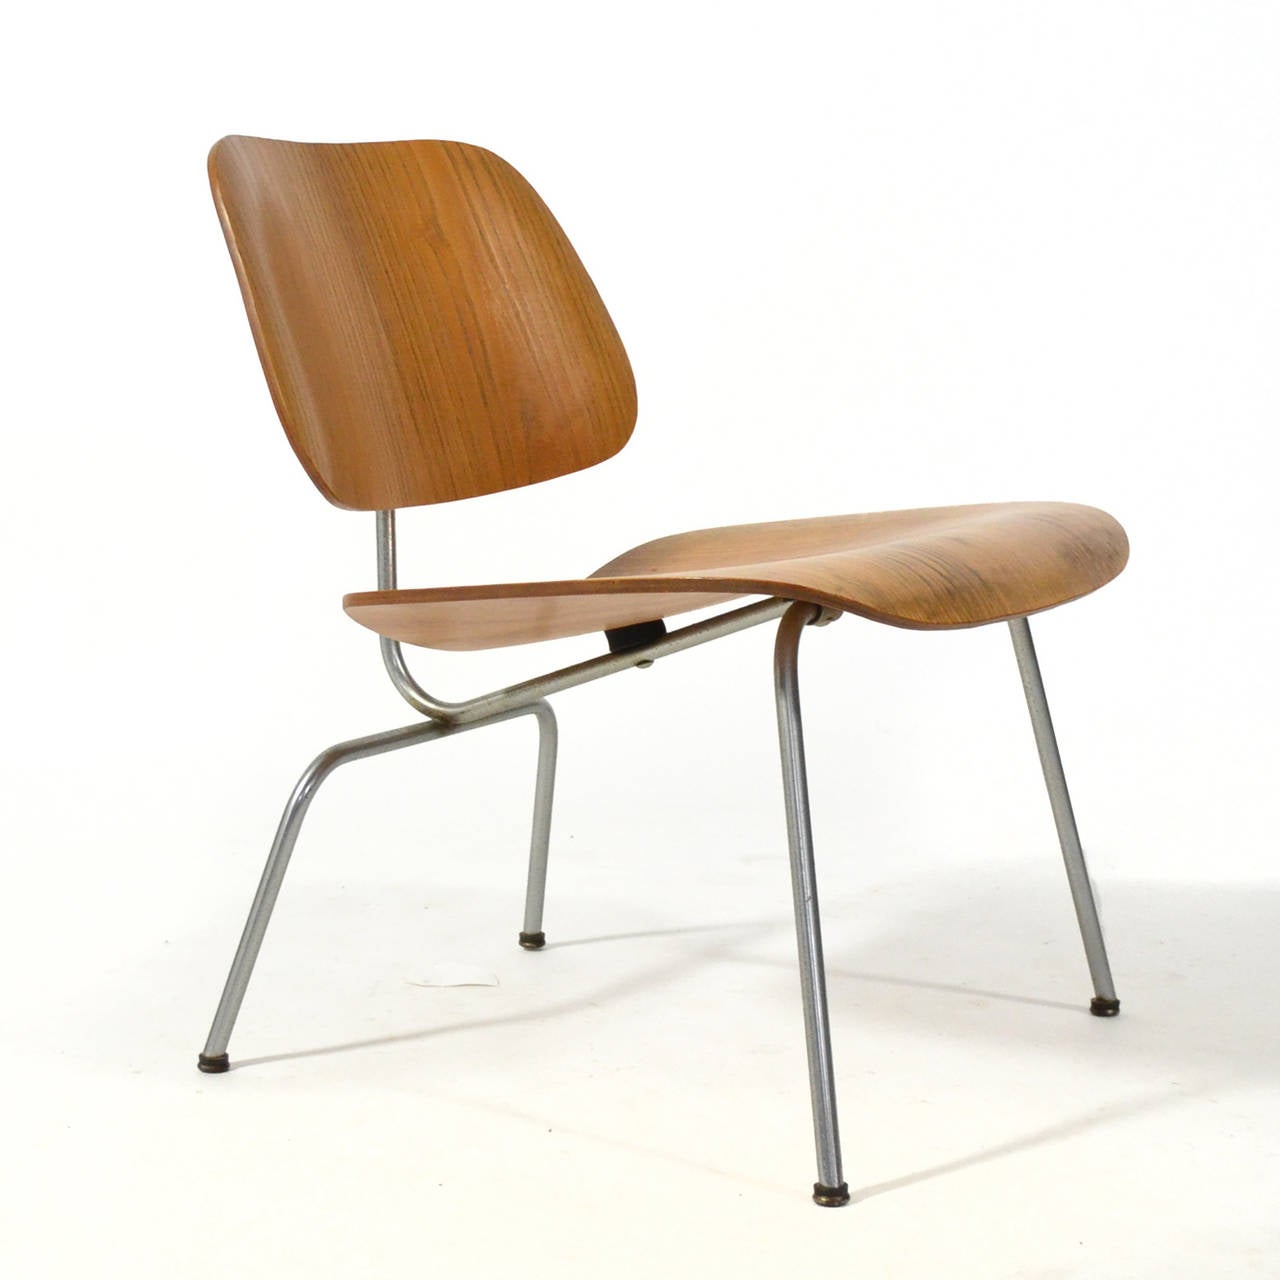 Mid-20th Century Eames LCM Lounge Chair by Herman Miller with Developmental Mounts